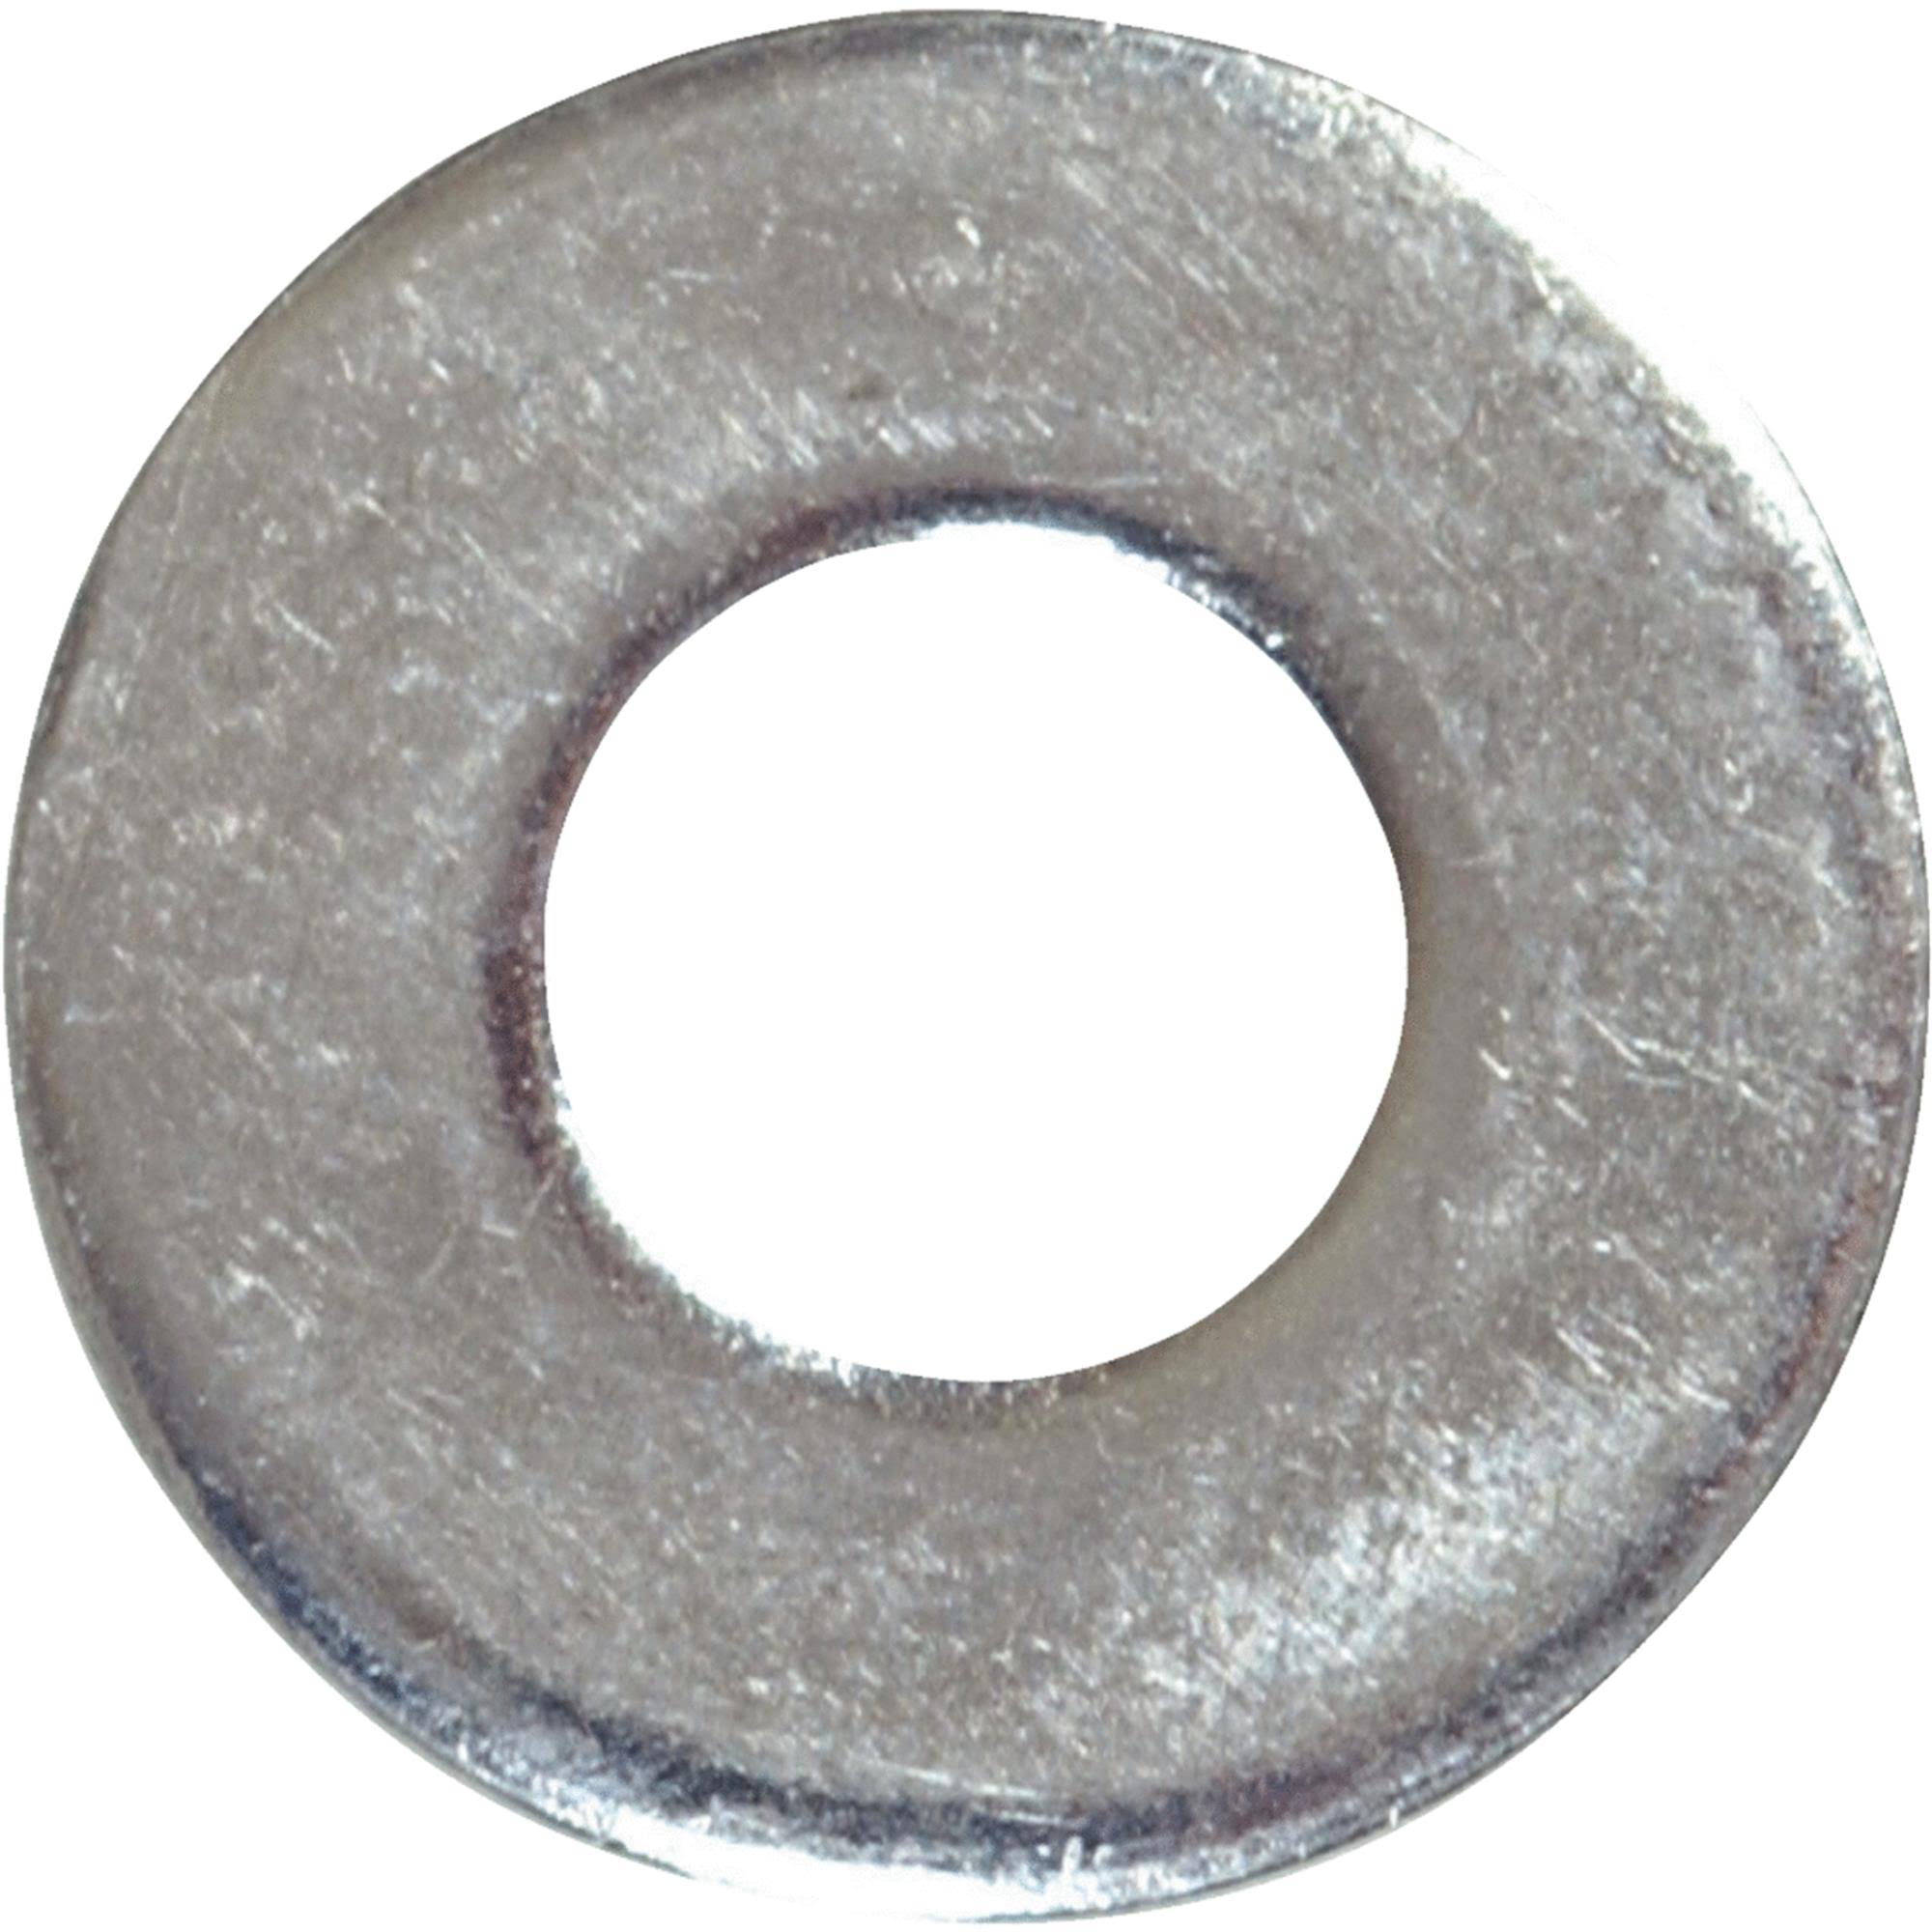 The Hillman Group 270055 Flat Zinc Washer, 1/4-Inch, 100-Pack